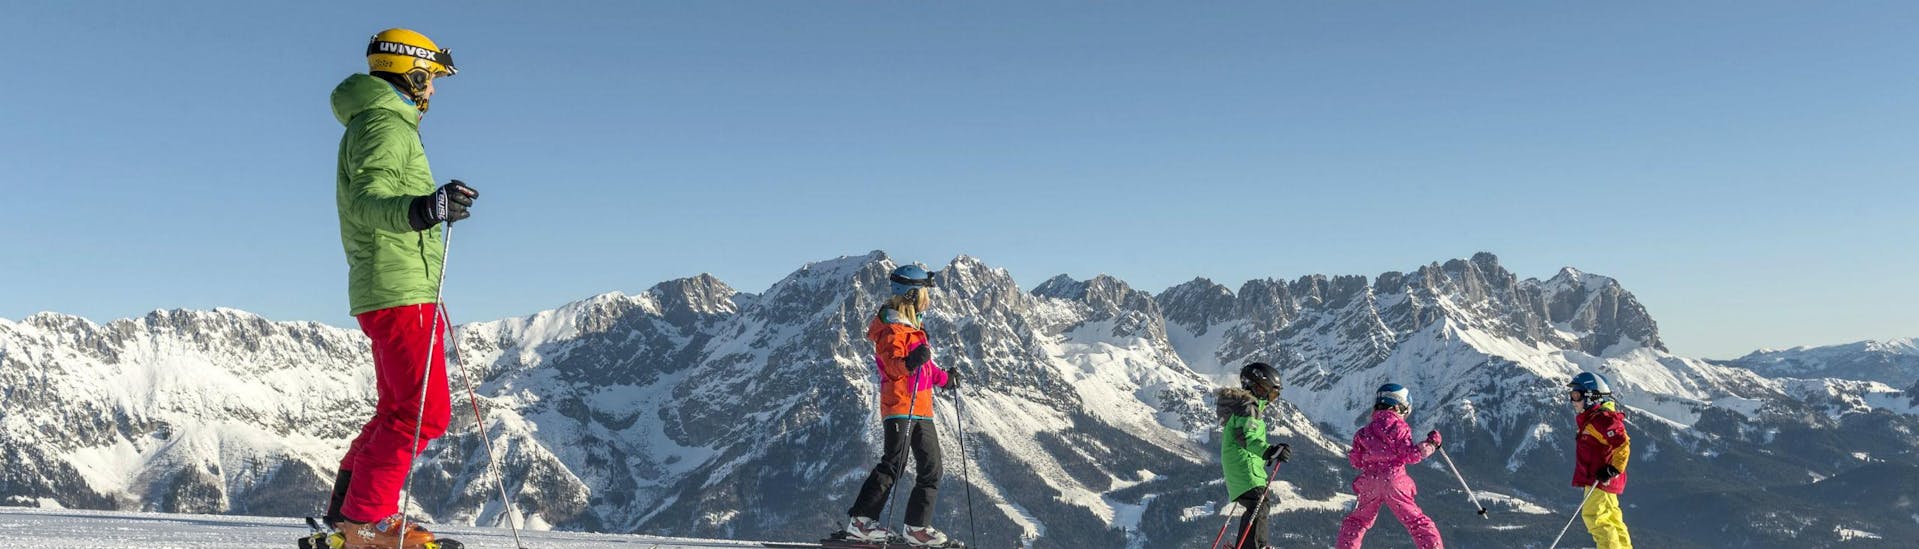 A family is enjoying a day out on the ski slopes of Going-Ellmau, where local ski schools carry out their ski lessons for those who want to learn to ski.